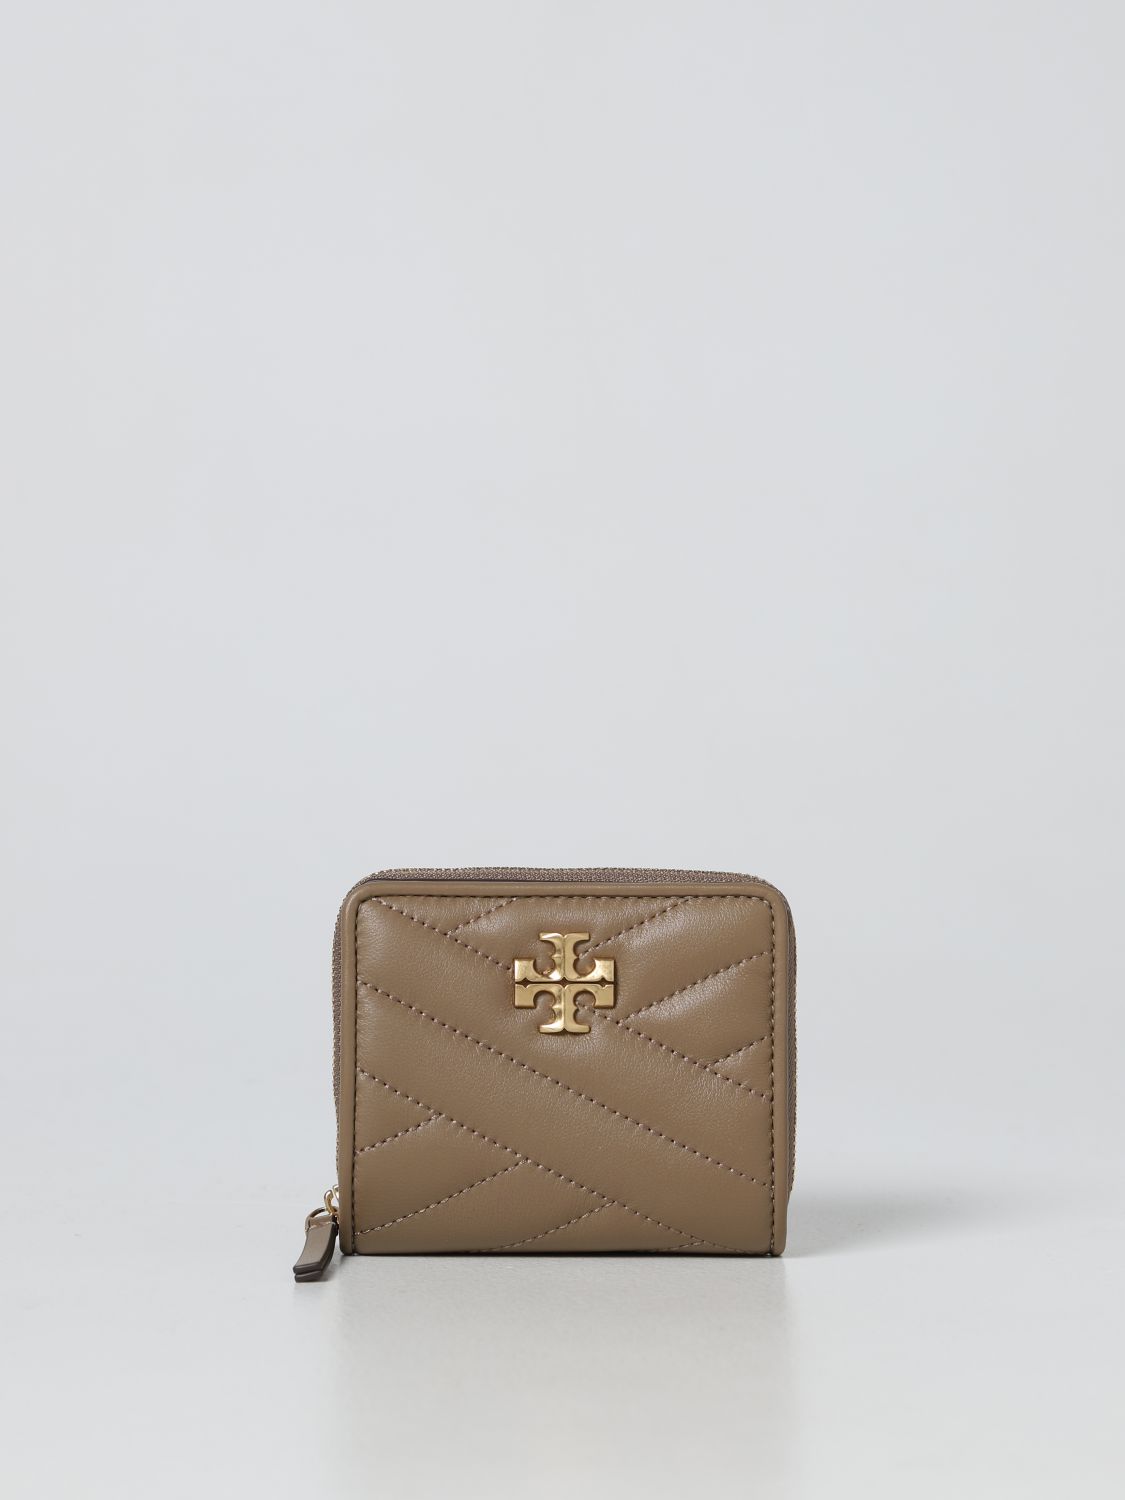 Tory Burch Outlet: wallet for woman - Beige | Tory Burch wallet 90344  online on 